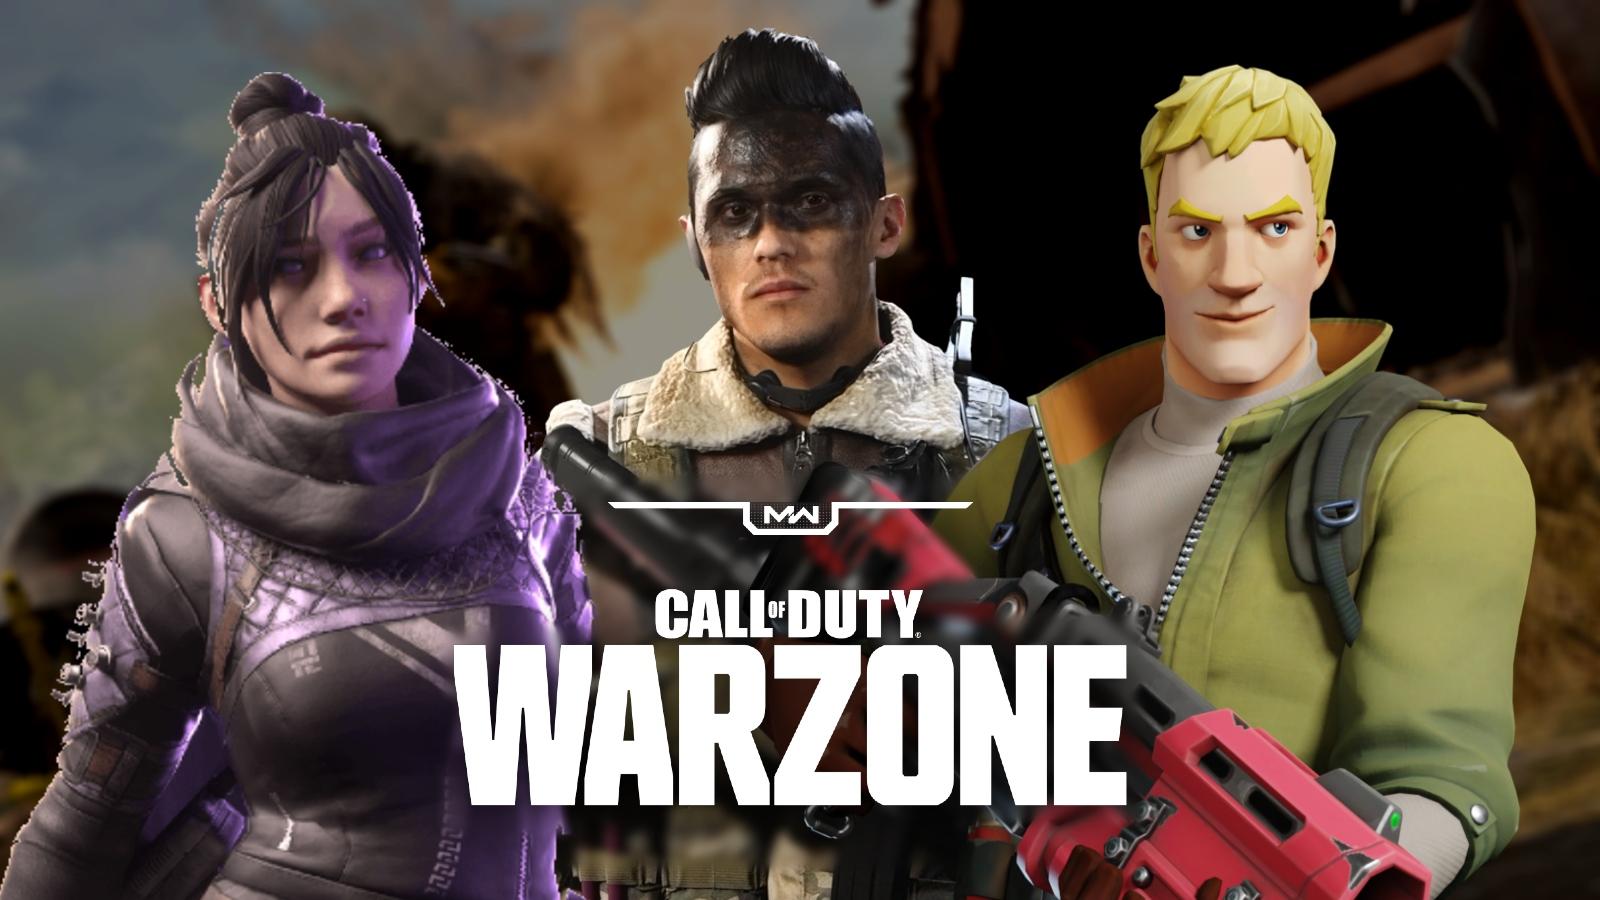 Warzone' Is 'Call of Duty's' Answer to 'Fortnite Battle Royale